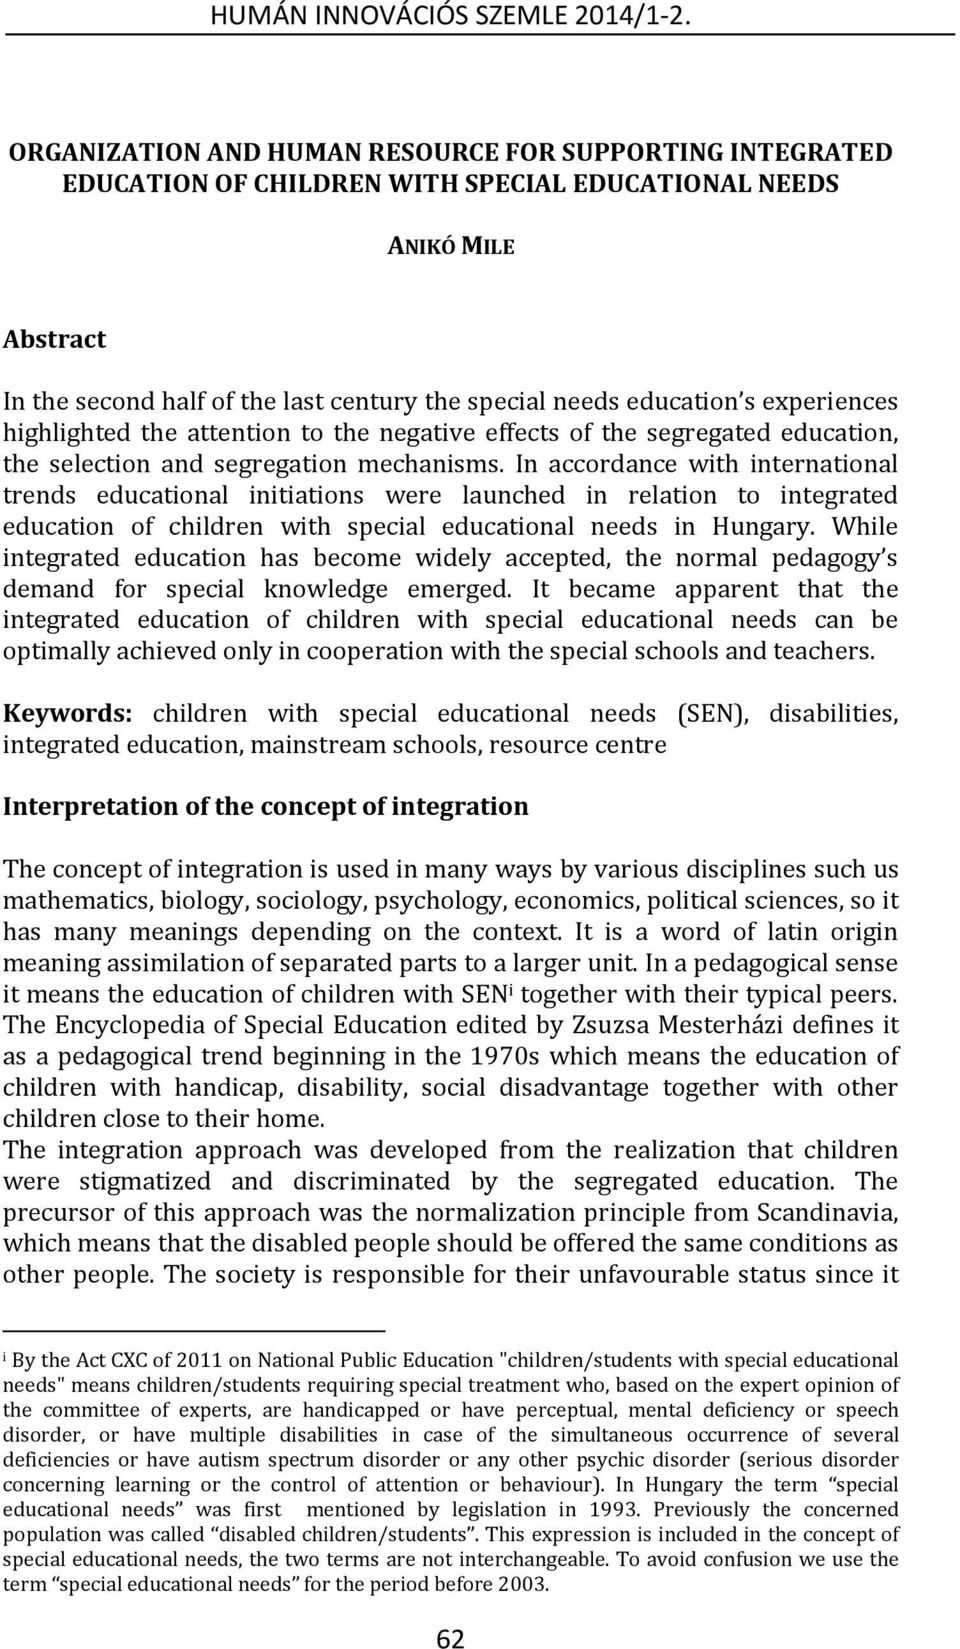 In accordance with international trends educational initiations were launched in relation to integrated education of children with special educational needs in Hungary.